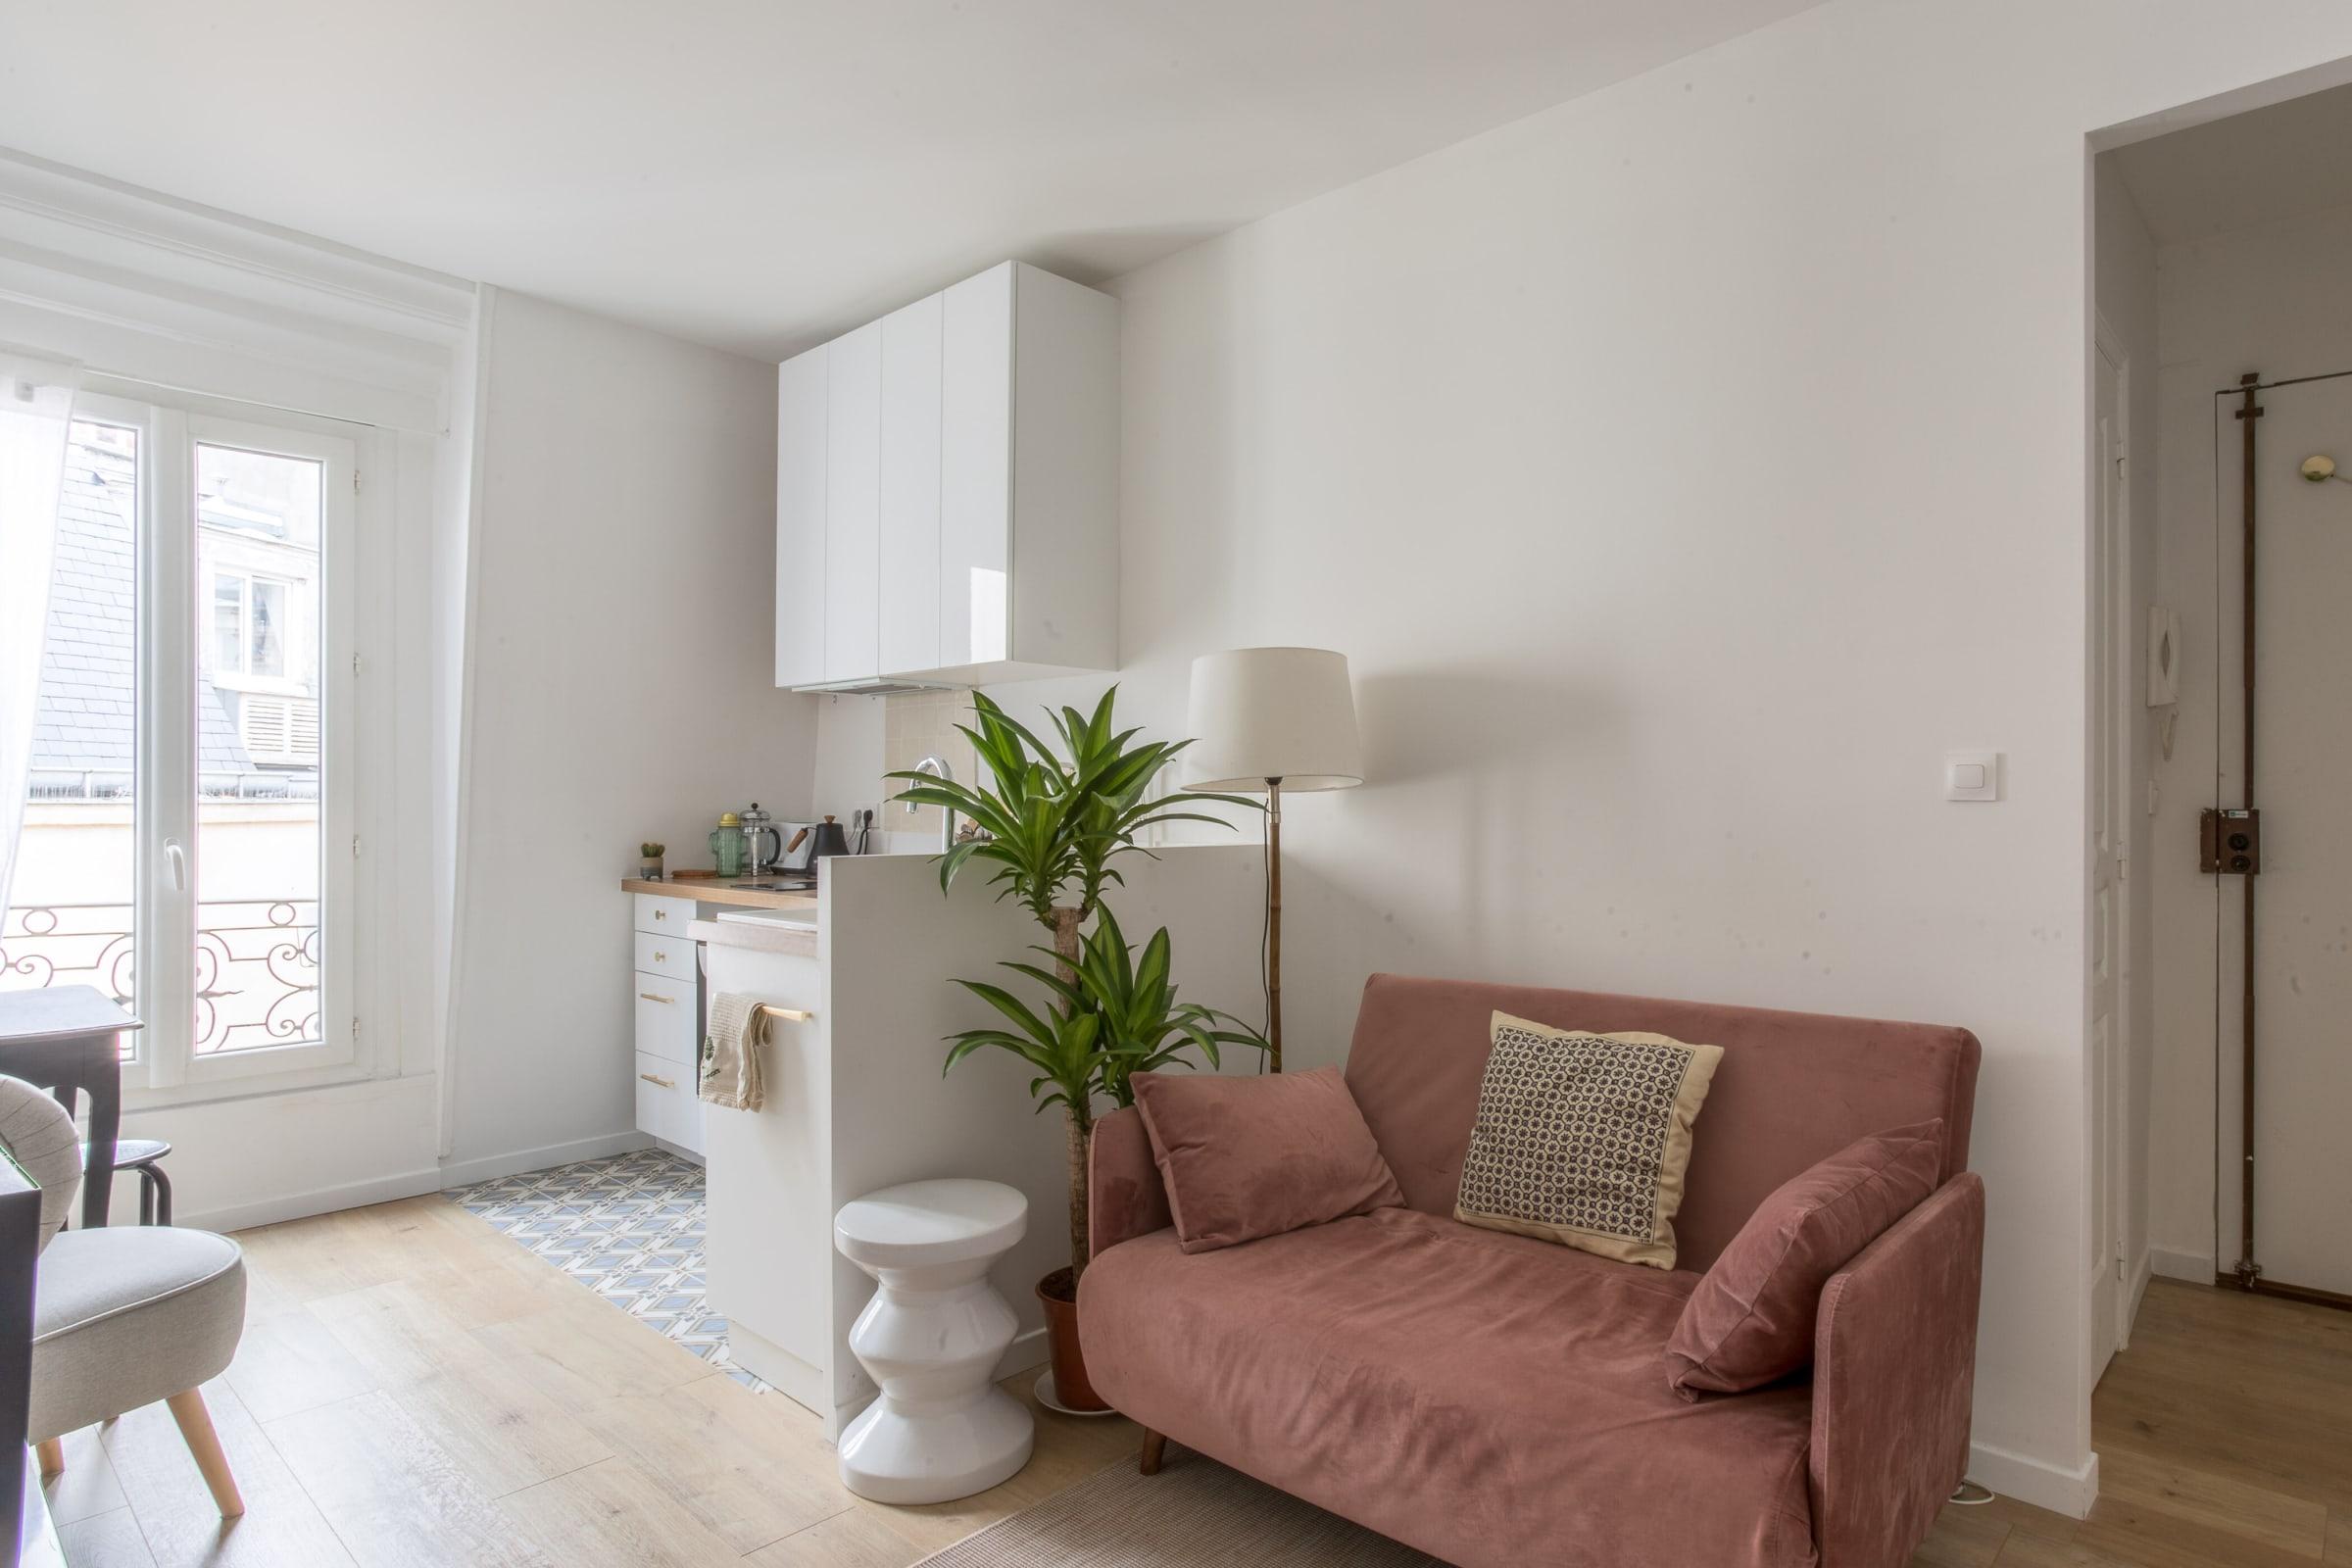 Property Image 1 - Bright and charming flat just a few steps from the Place de la Nation